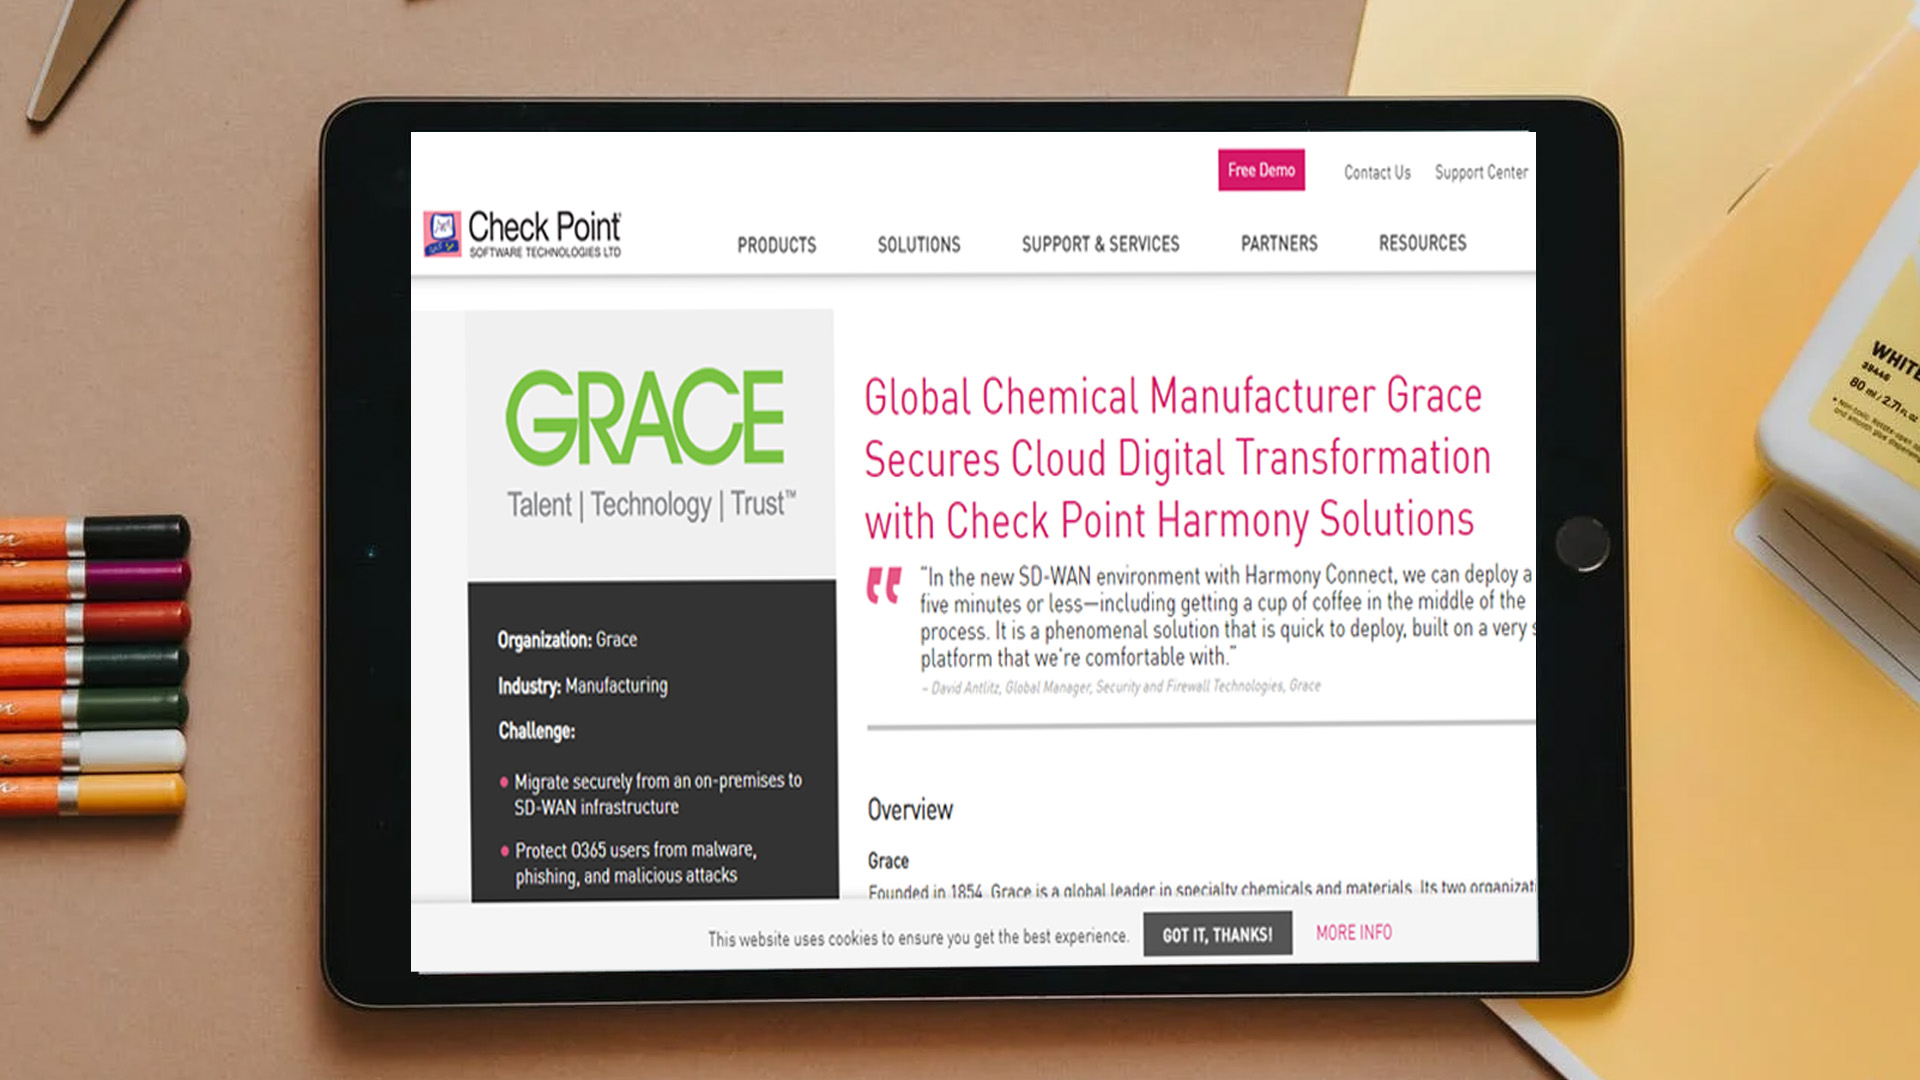 Grace implements Check Point solutions for comprehensive protection